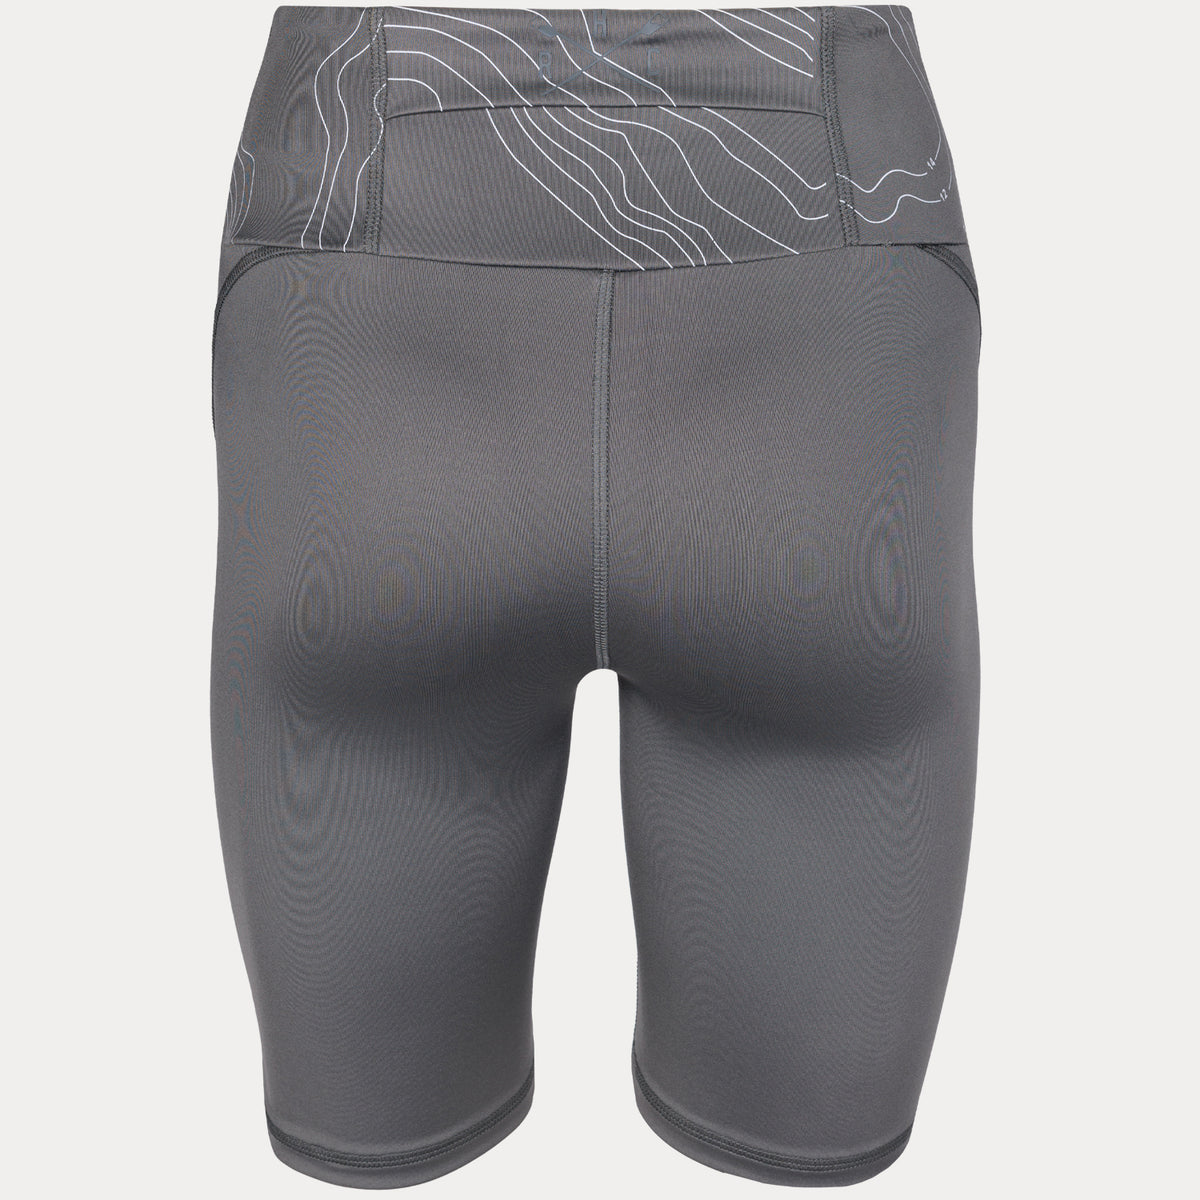 rear view photo of compression shorts in charcoal showing contour lines on waistband and hrc crossed oar logo on rear waistband